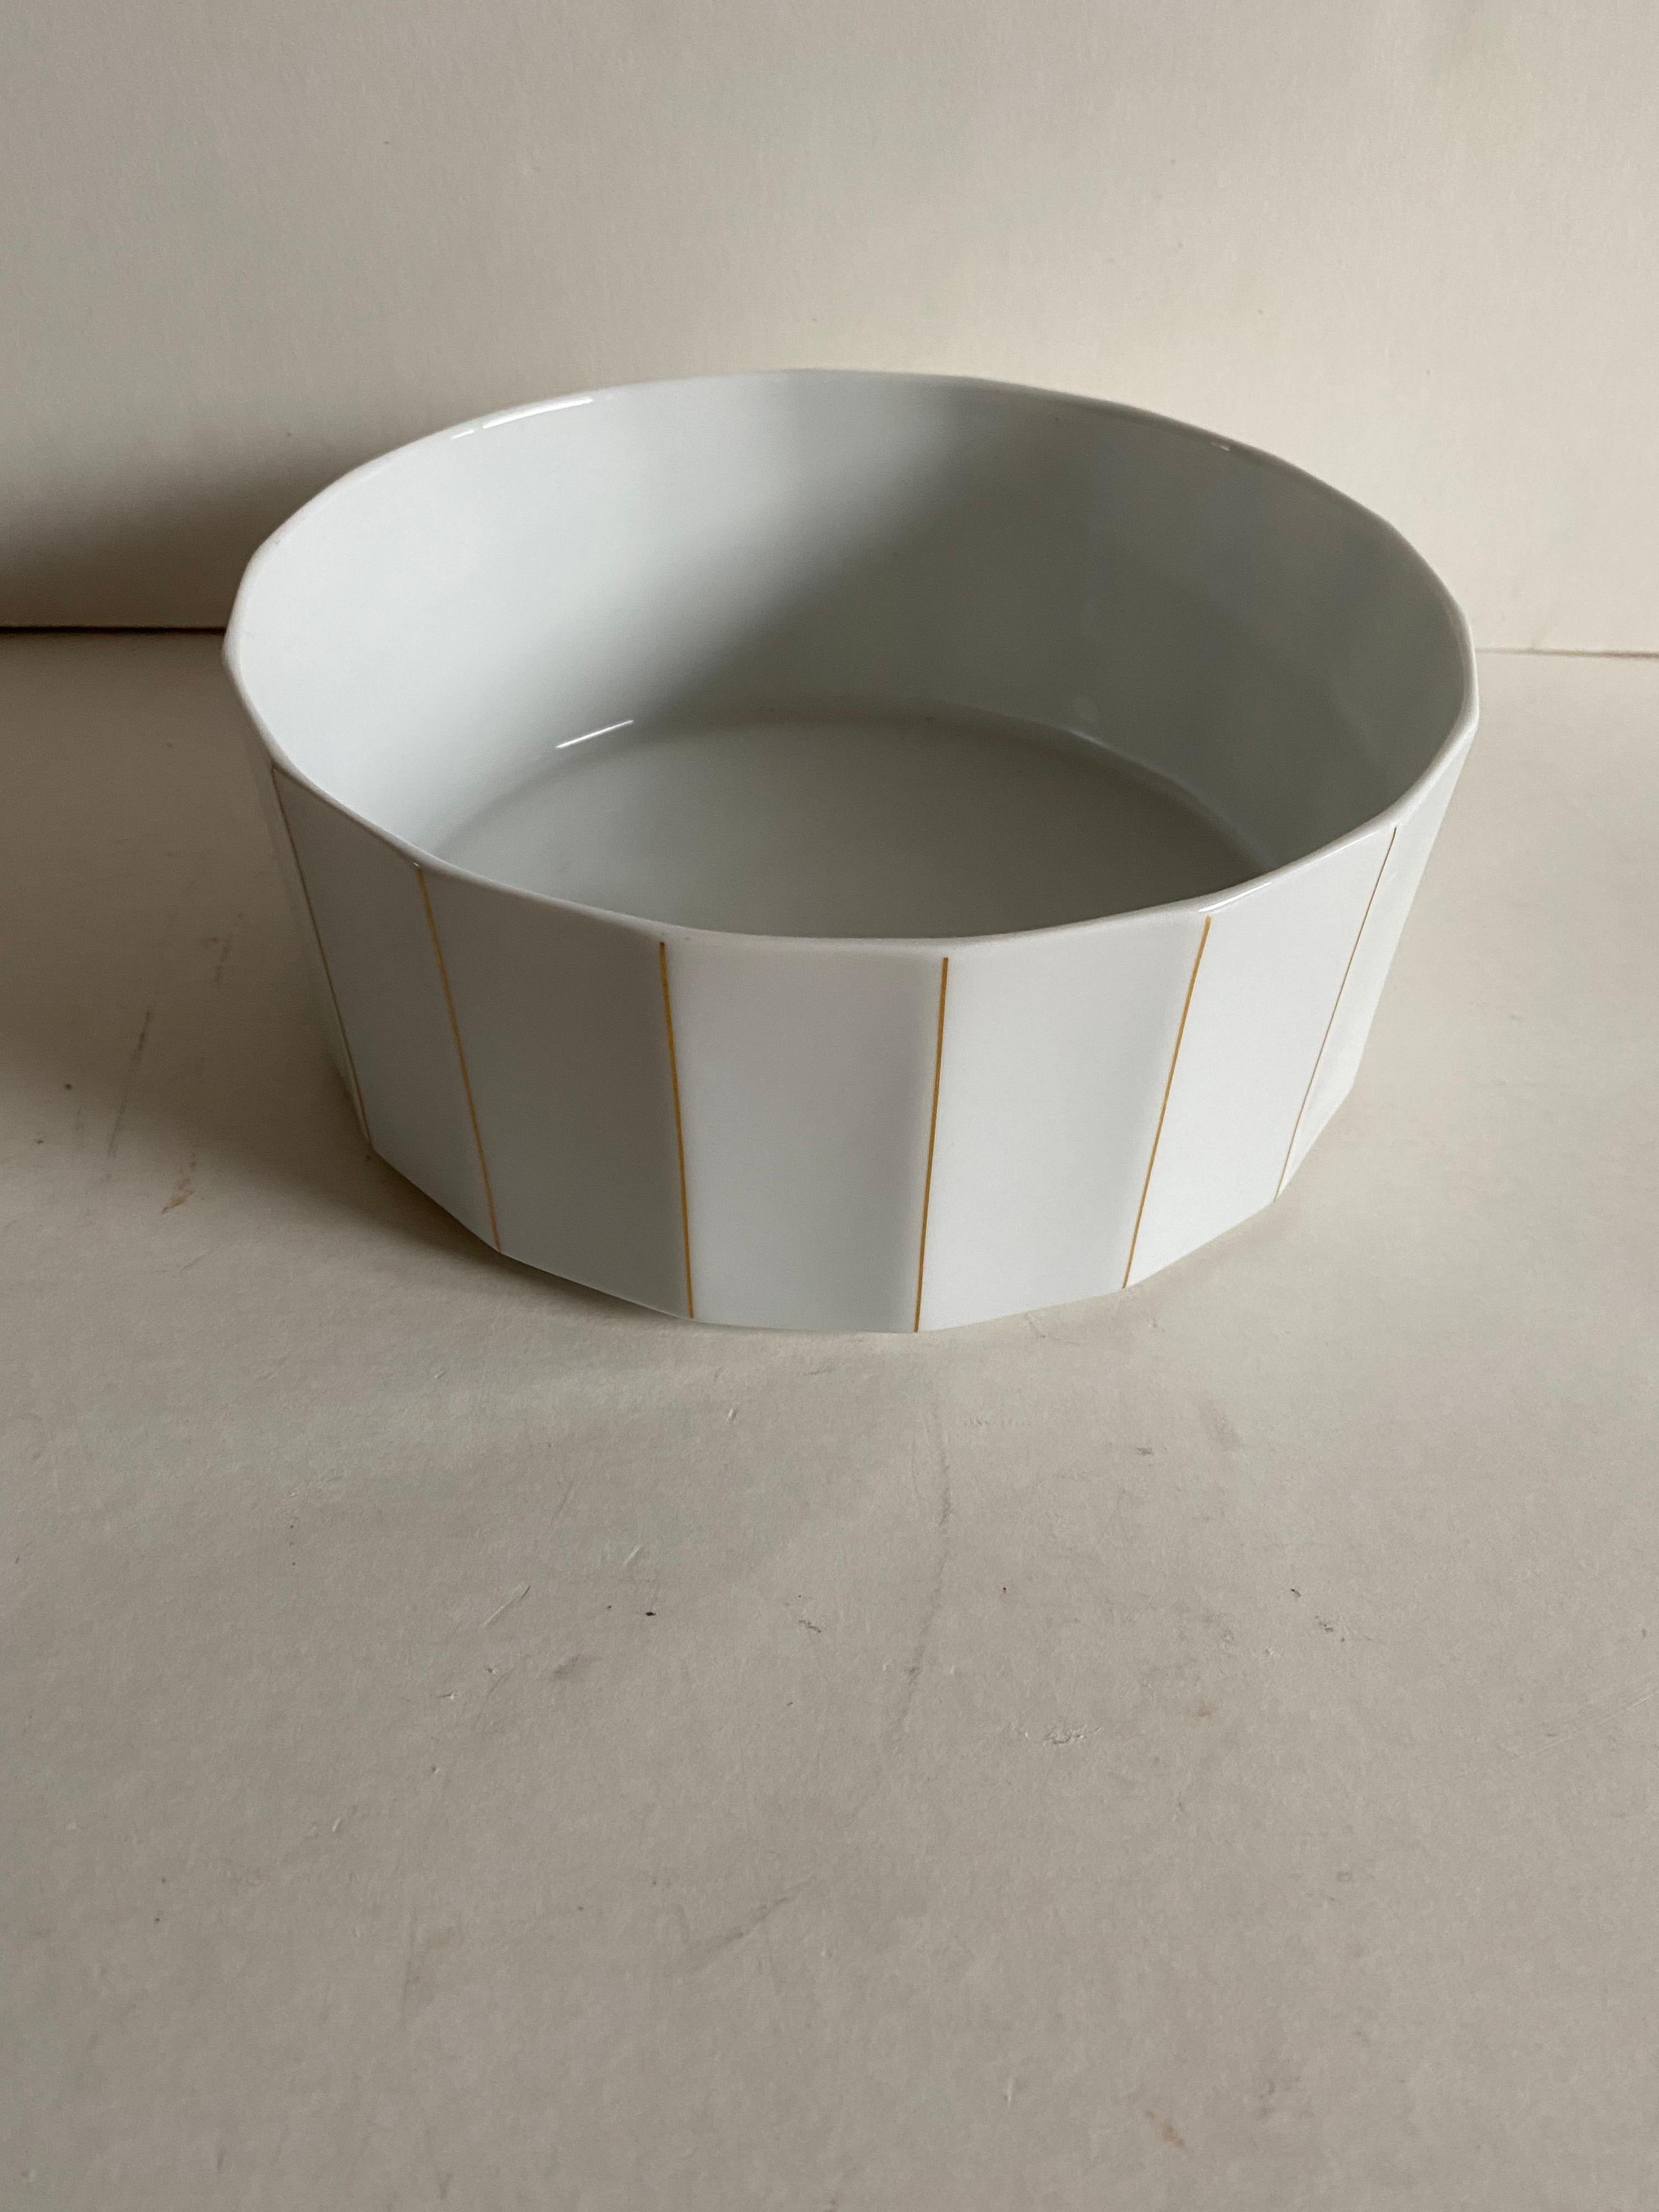 A multi-sided porcelain serving bowl in the Polygon pattern designed by Tapio Wirkkala for Rosenthal Germany's Studio Line collection. 

All white with gold edged sides.